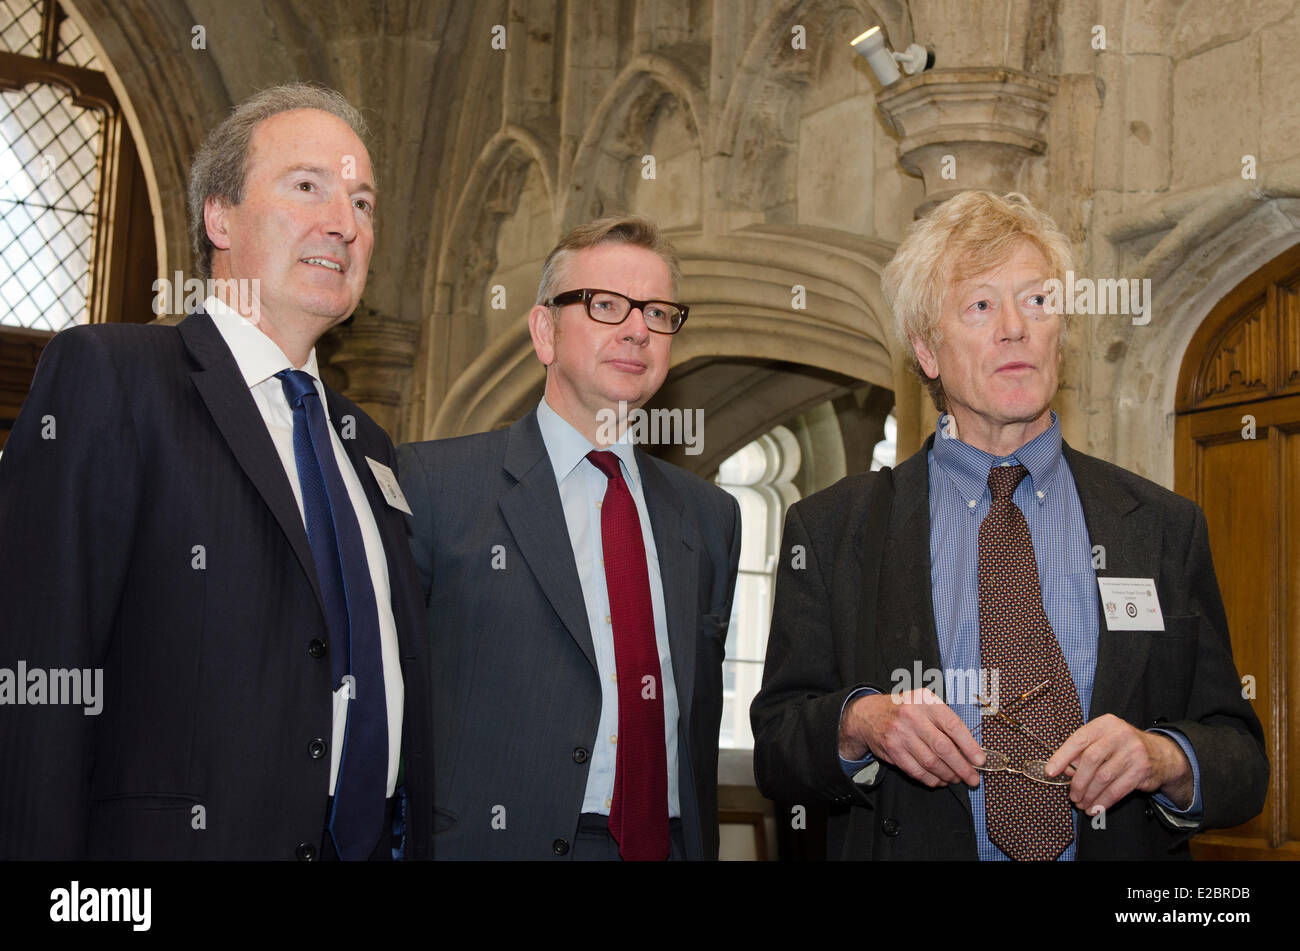 London, UK. 18th June, 2014. Charles Moore Michael Gove Education Secretary Prof. Roger Scruton at the Margaret Thatcher Conference on Liberty 18th June 2014 Guildhall London uk Credit:  Prixpics/Alamy Live News Stock Photo